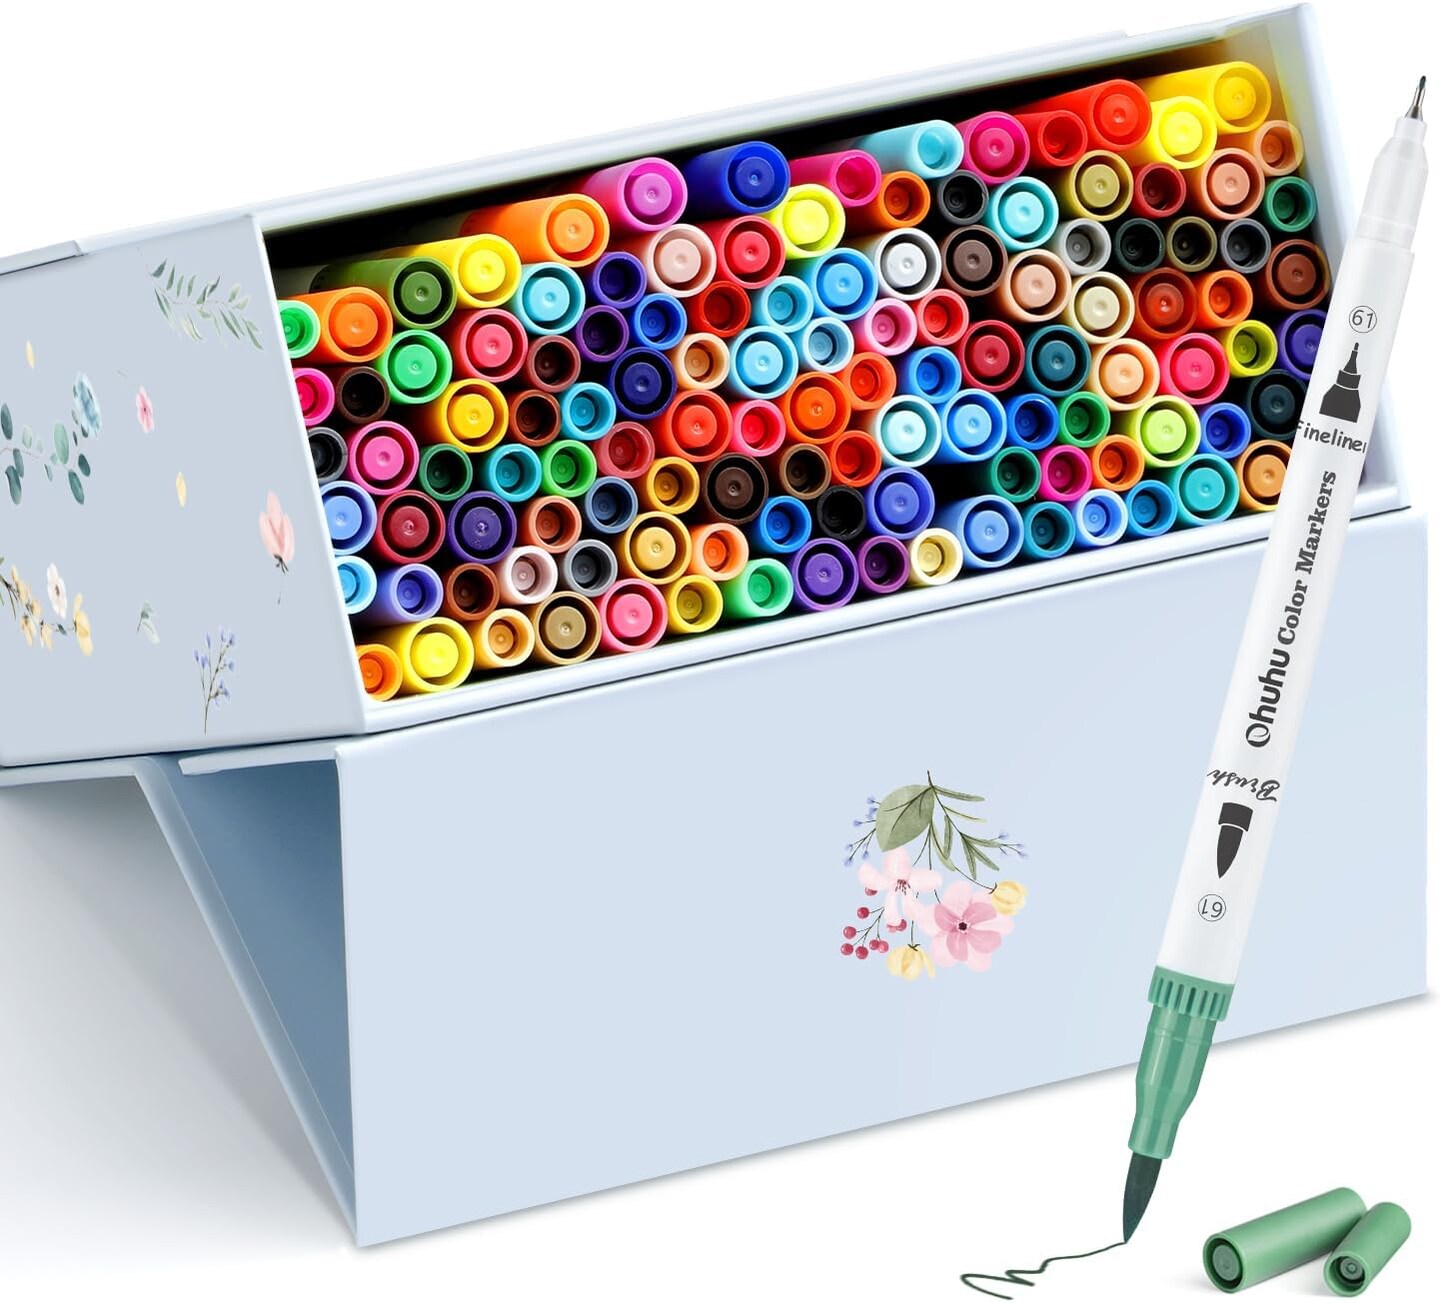 120 Colors Dual Tip Brush Pens, Fine Tip Brush Markers for Adult